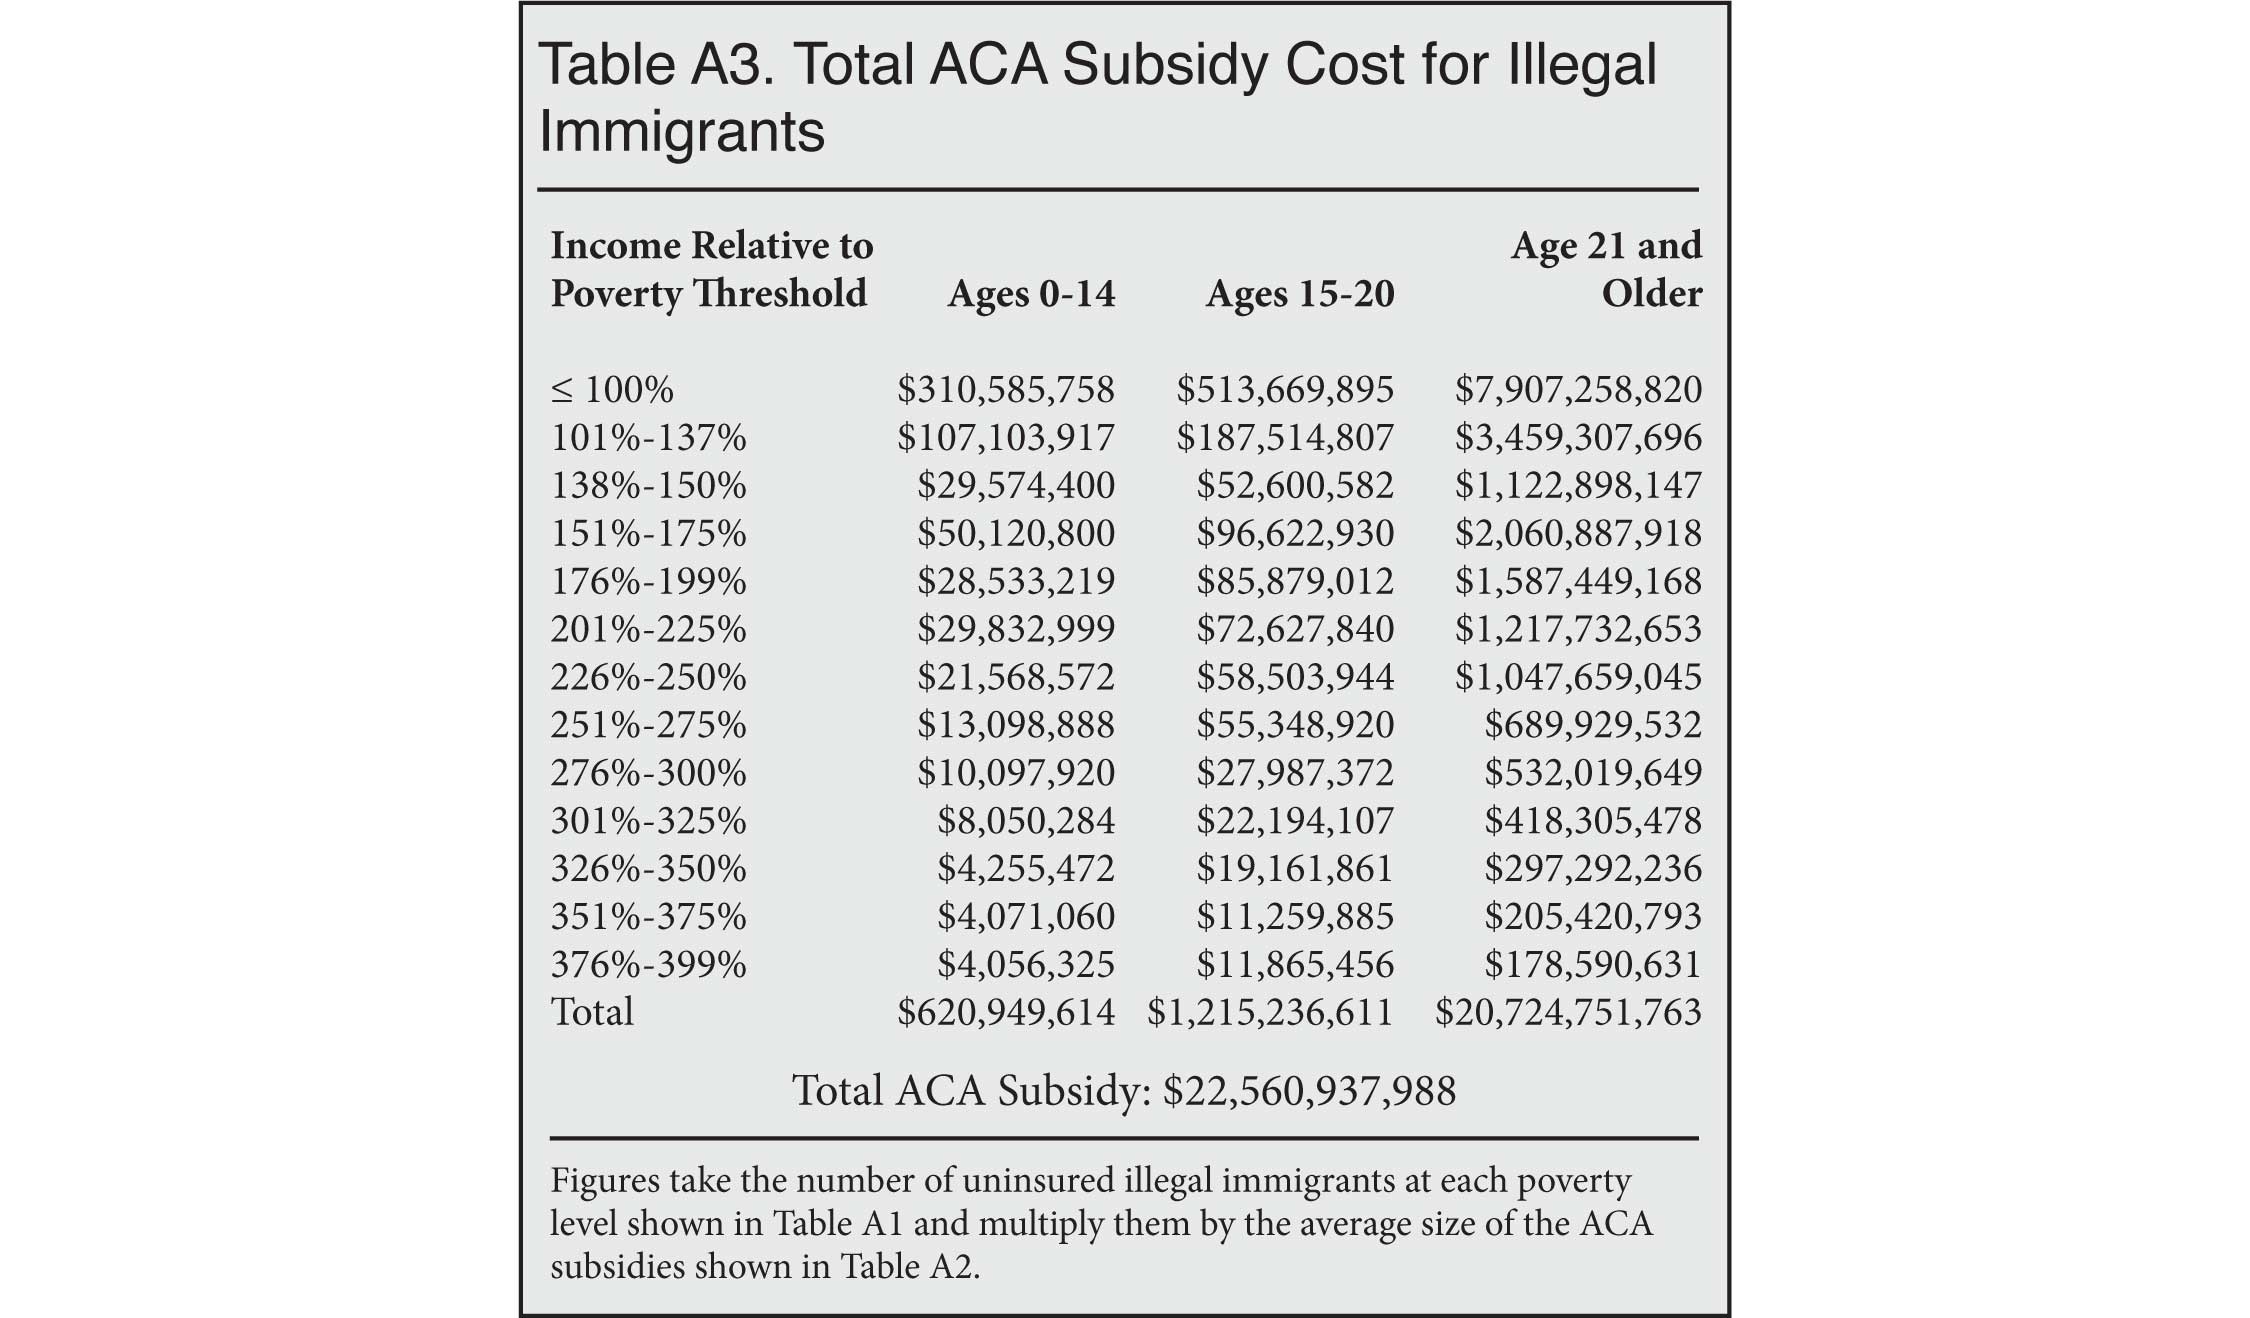 Table: Total Subsidy Cost for Illegal Immigrants